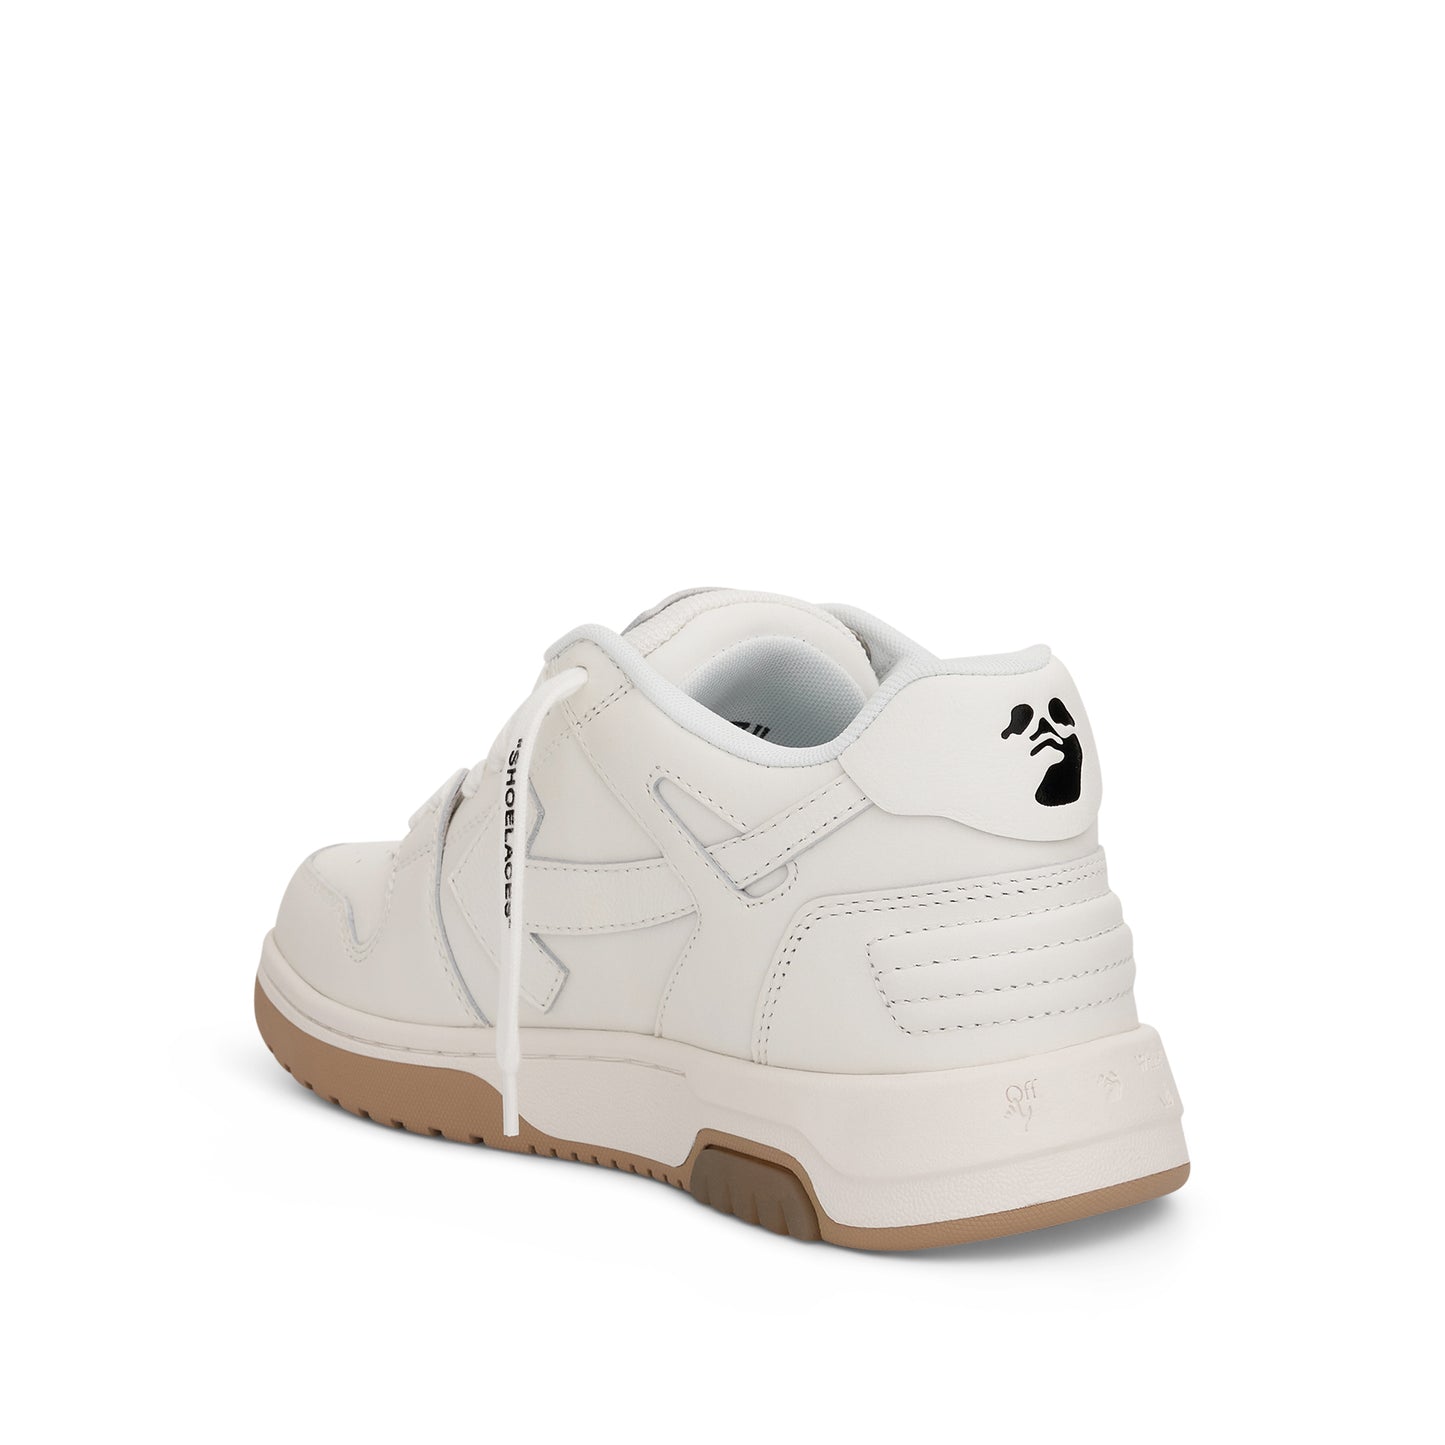 Out Of Office 'For Walking' Sneaker in White/Sand